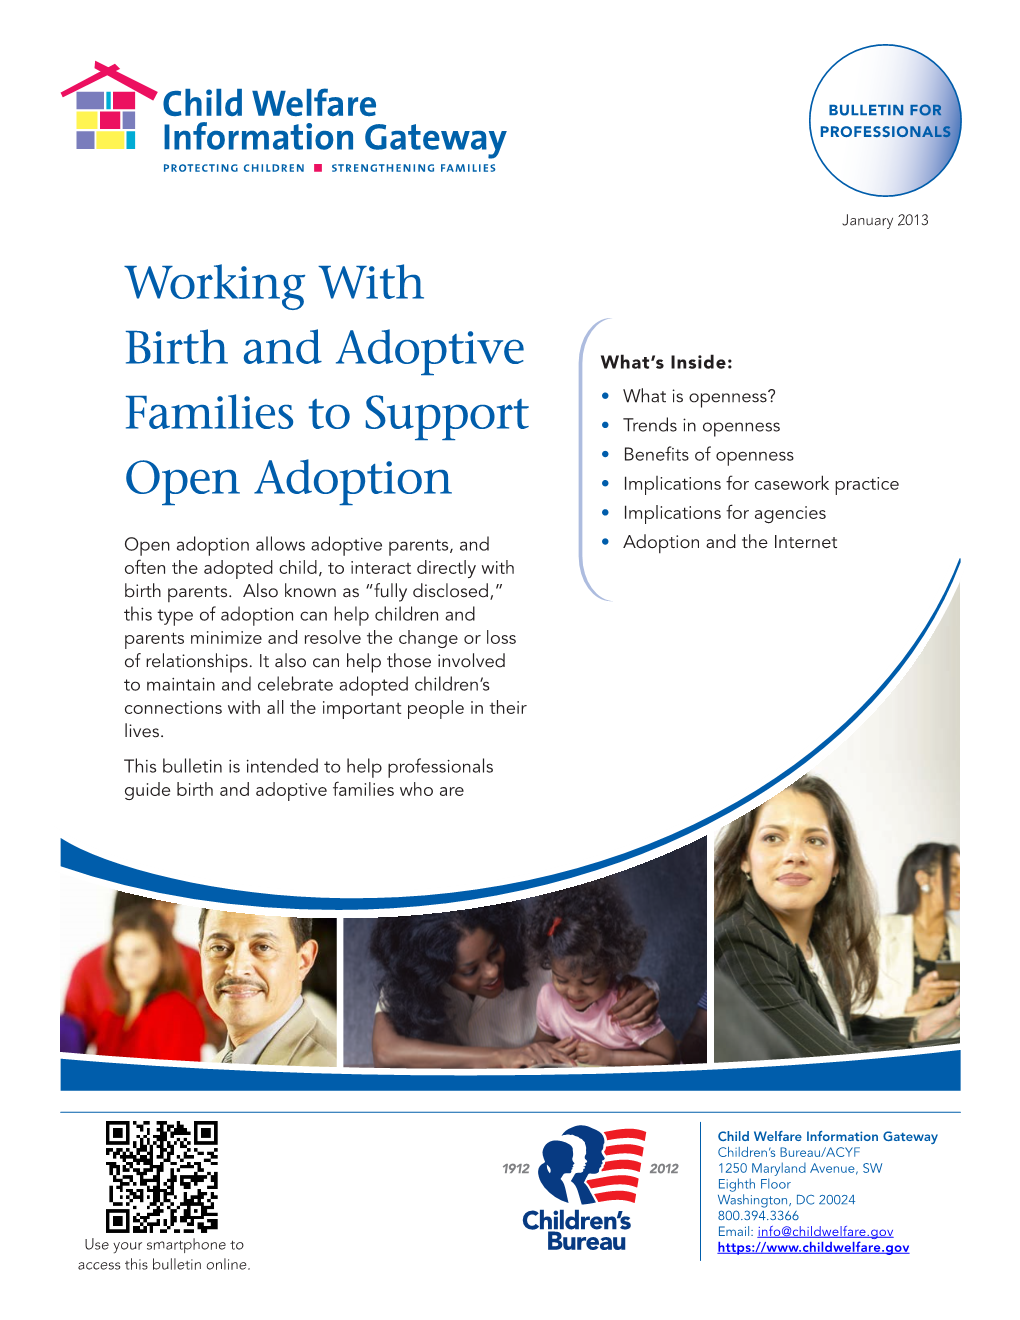 Working with Birth and Adoptive Families to Support Open Adoption